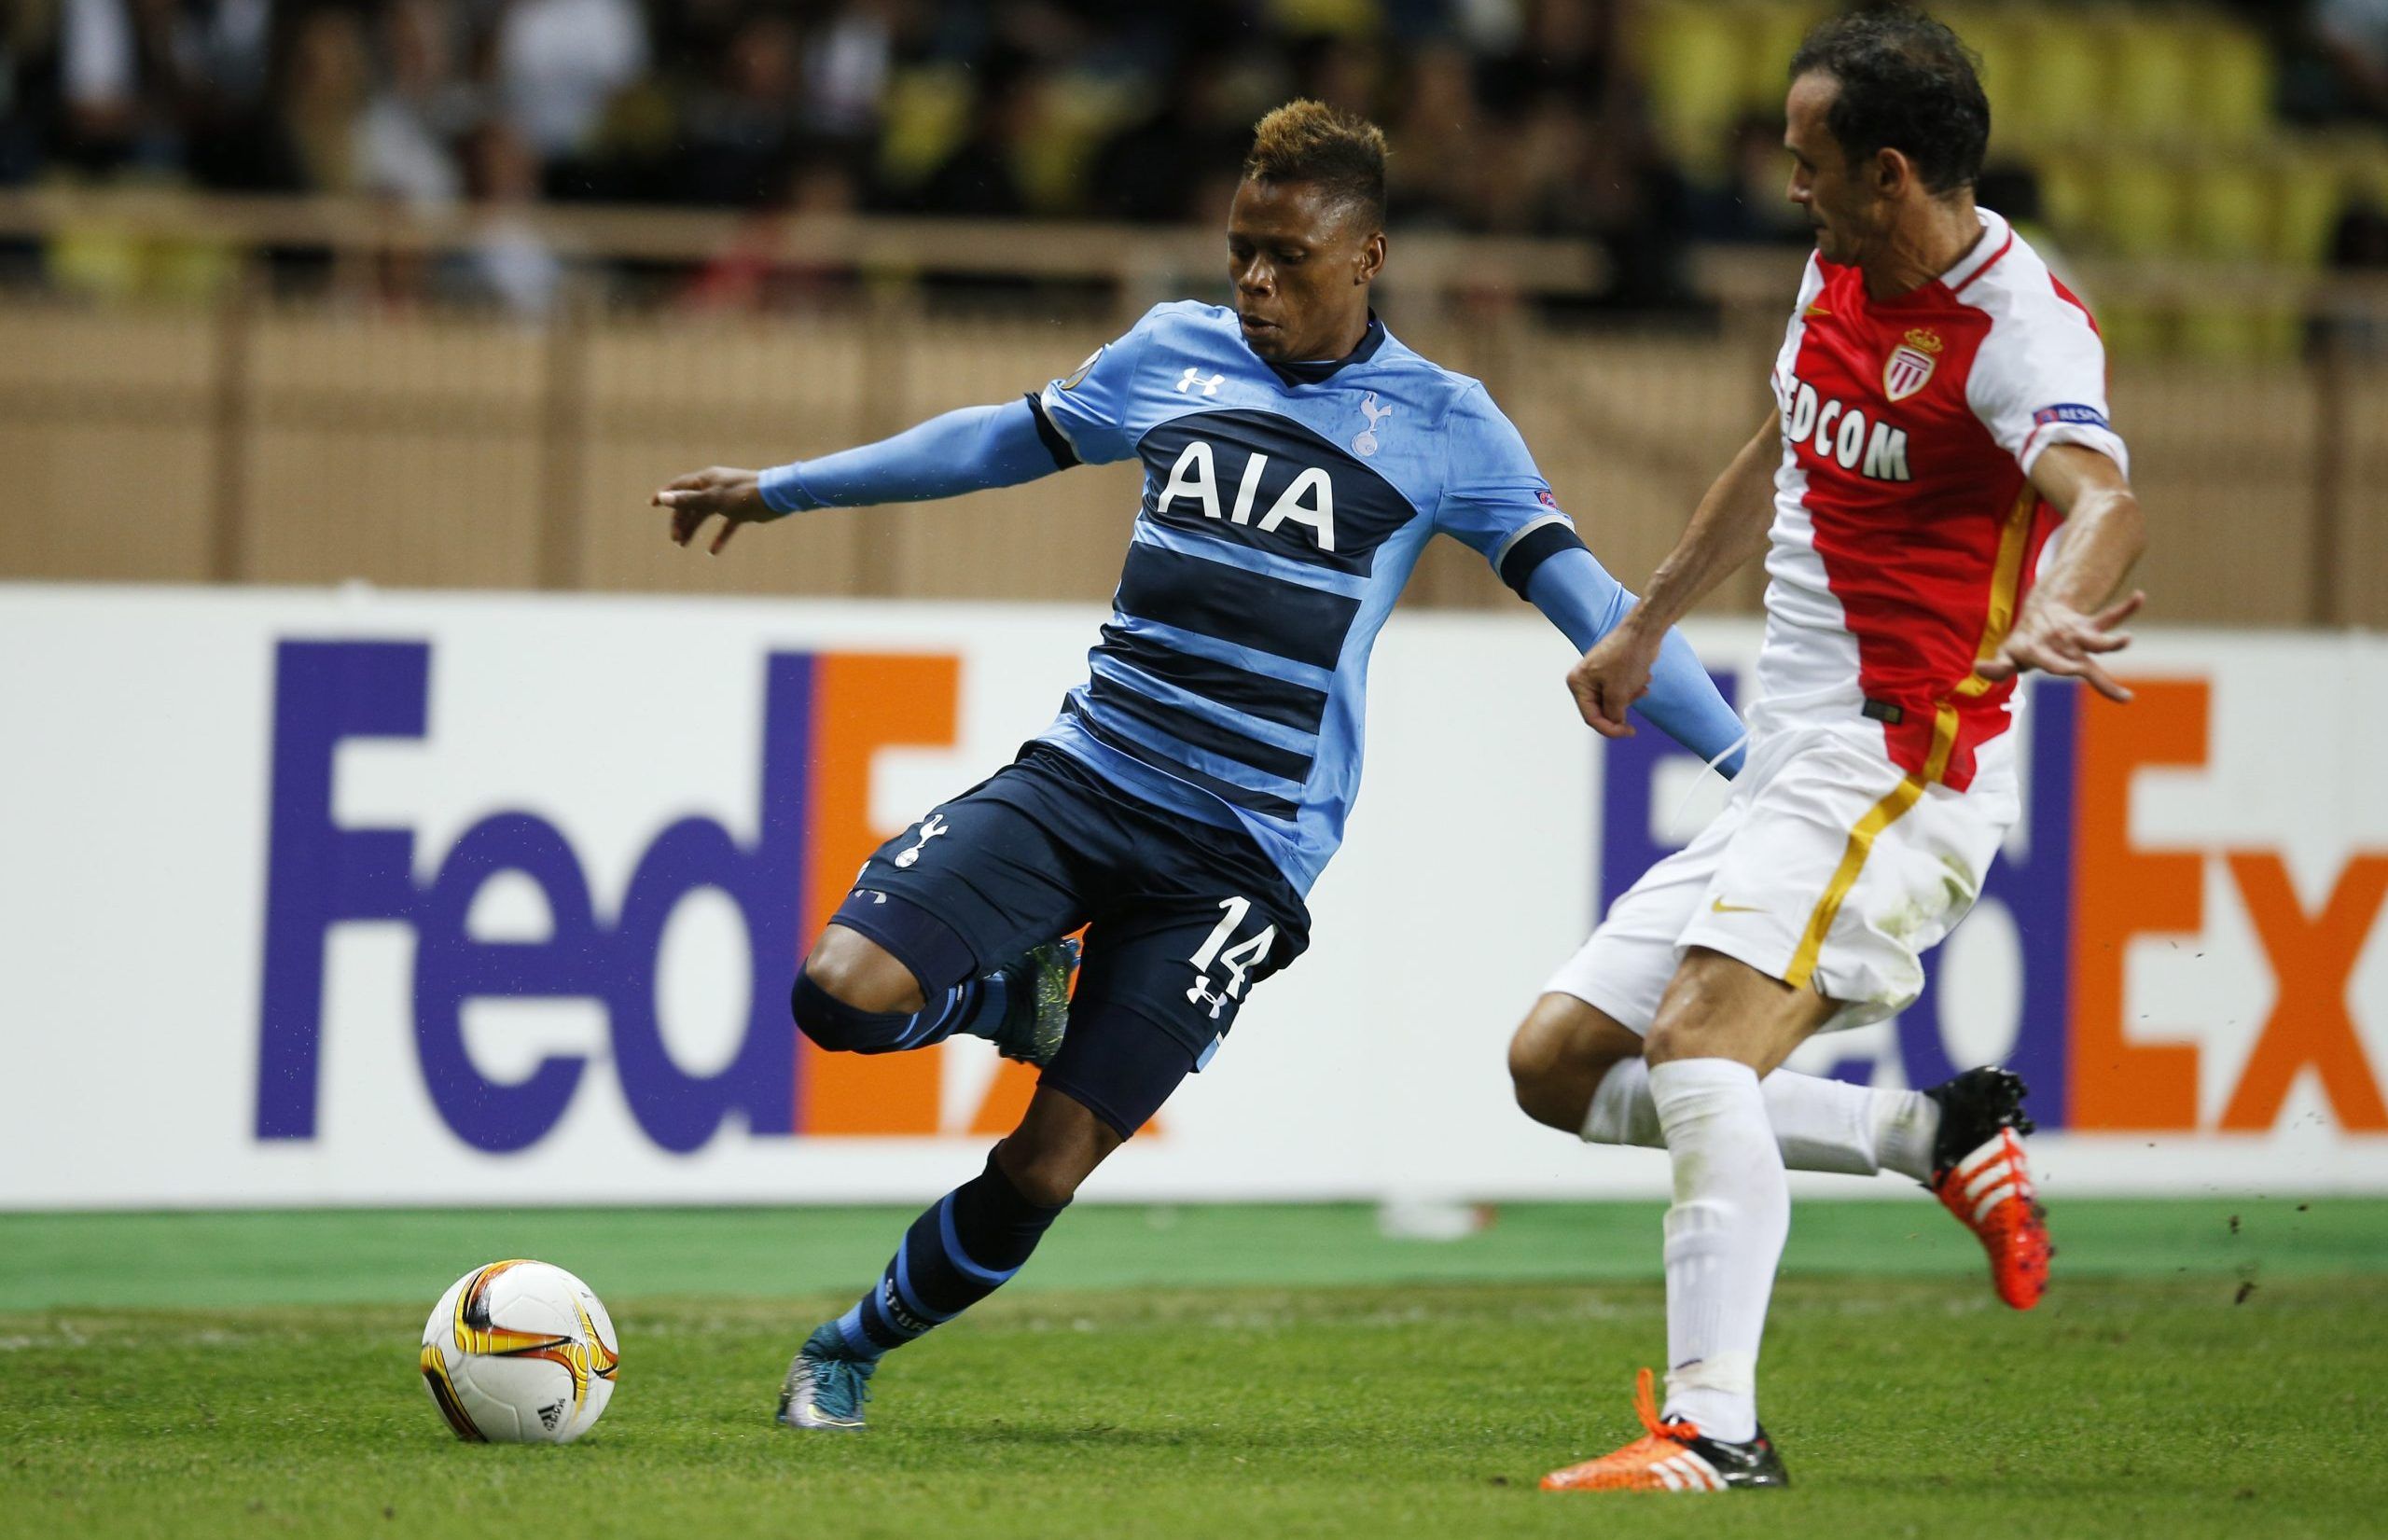 Football - AS Monaco v Tottenham Hotspur - UEFA Europa League Group Stage - Group J - Stade Louis II, Monaco - 1/10/15
Tottenham's Clinton N'Jie in action with Monaco's Ricardo Carvalho
Action Images via Reuters / Andrew Couldridge
Livepic
EDITORIAL USE ONLY.